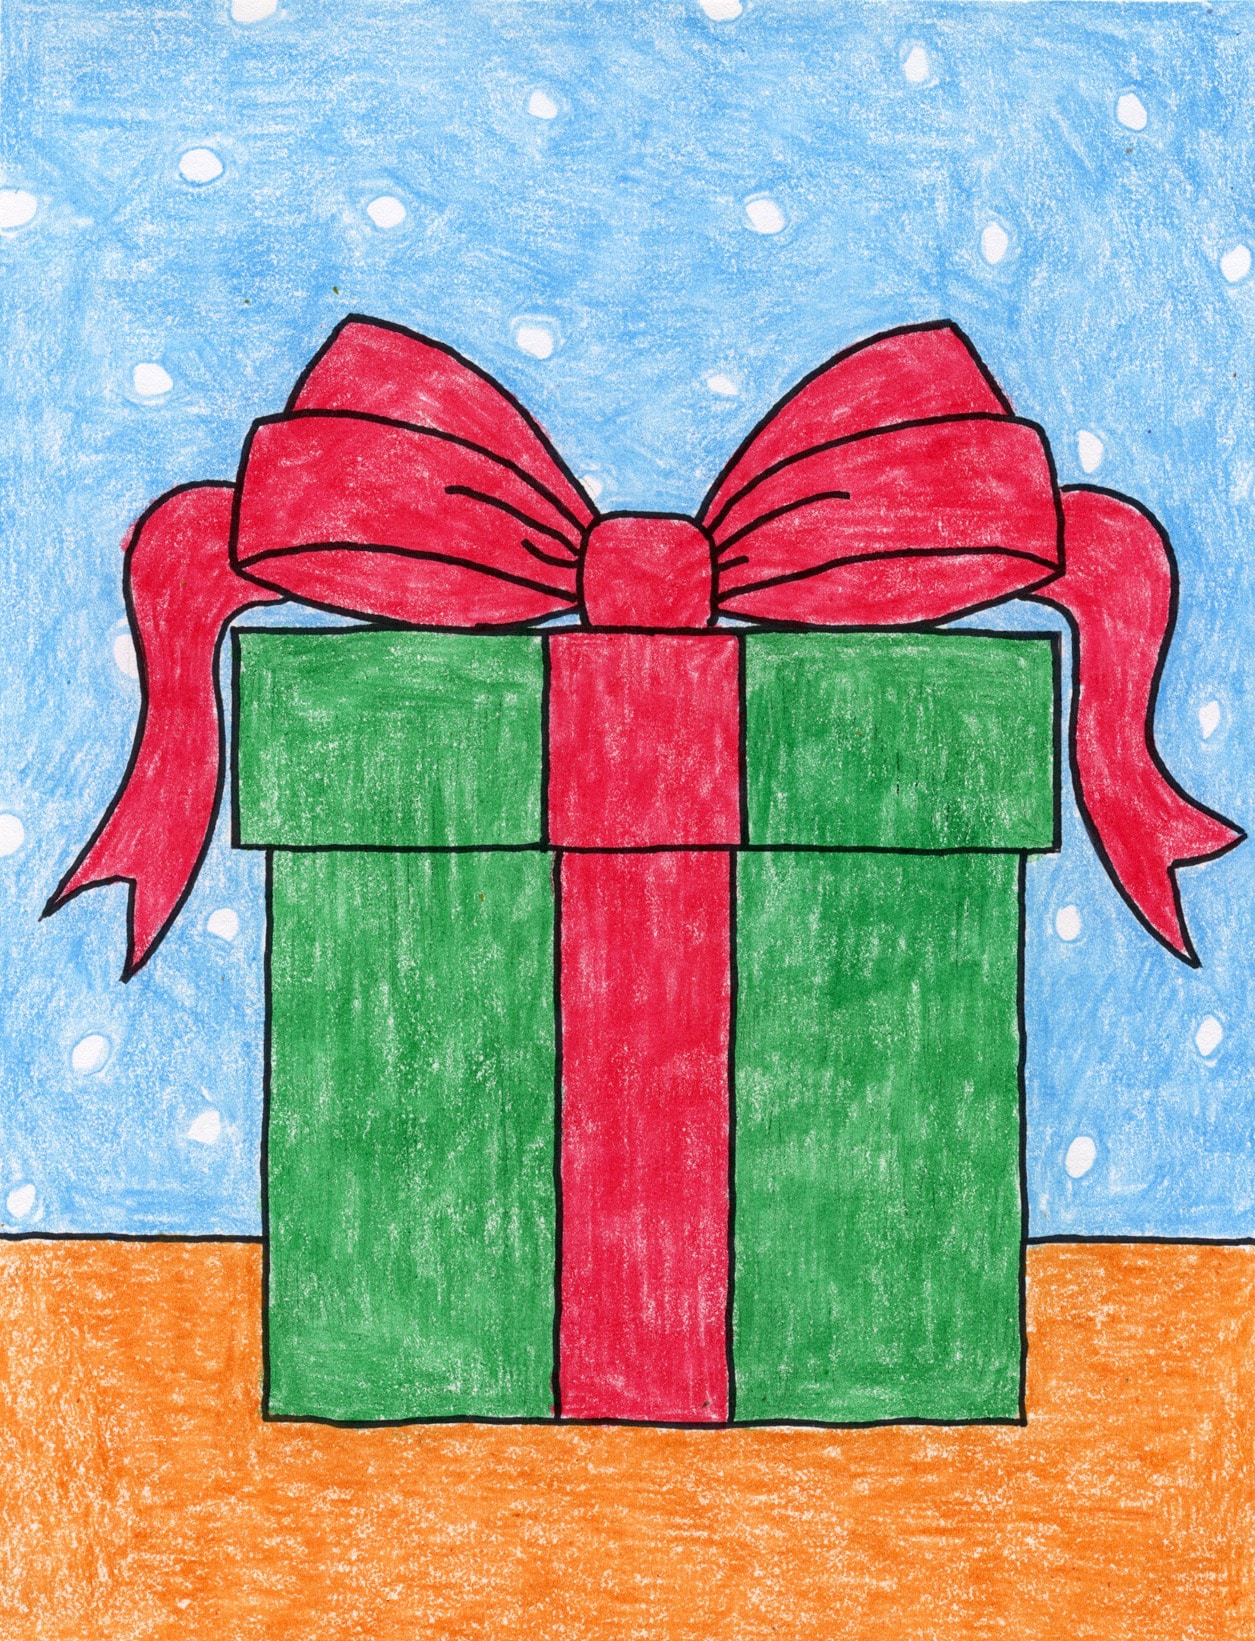 Easy How to Draw a Present Tutorial Video & Present Coloring Page